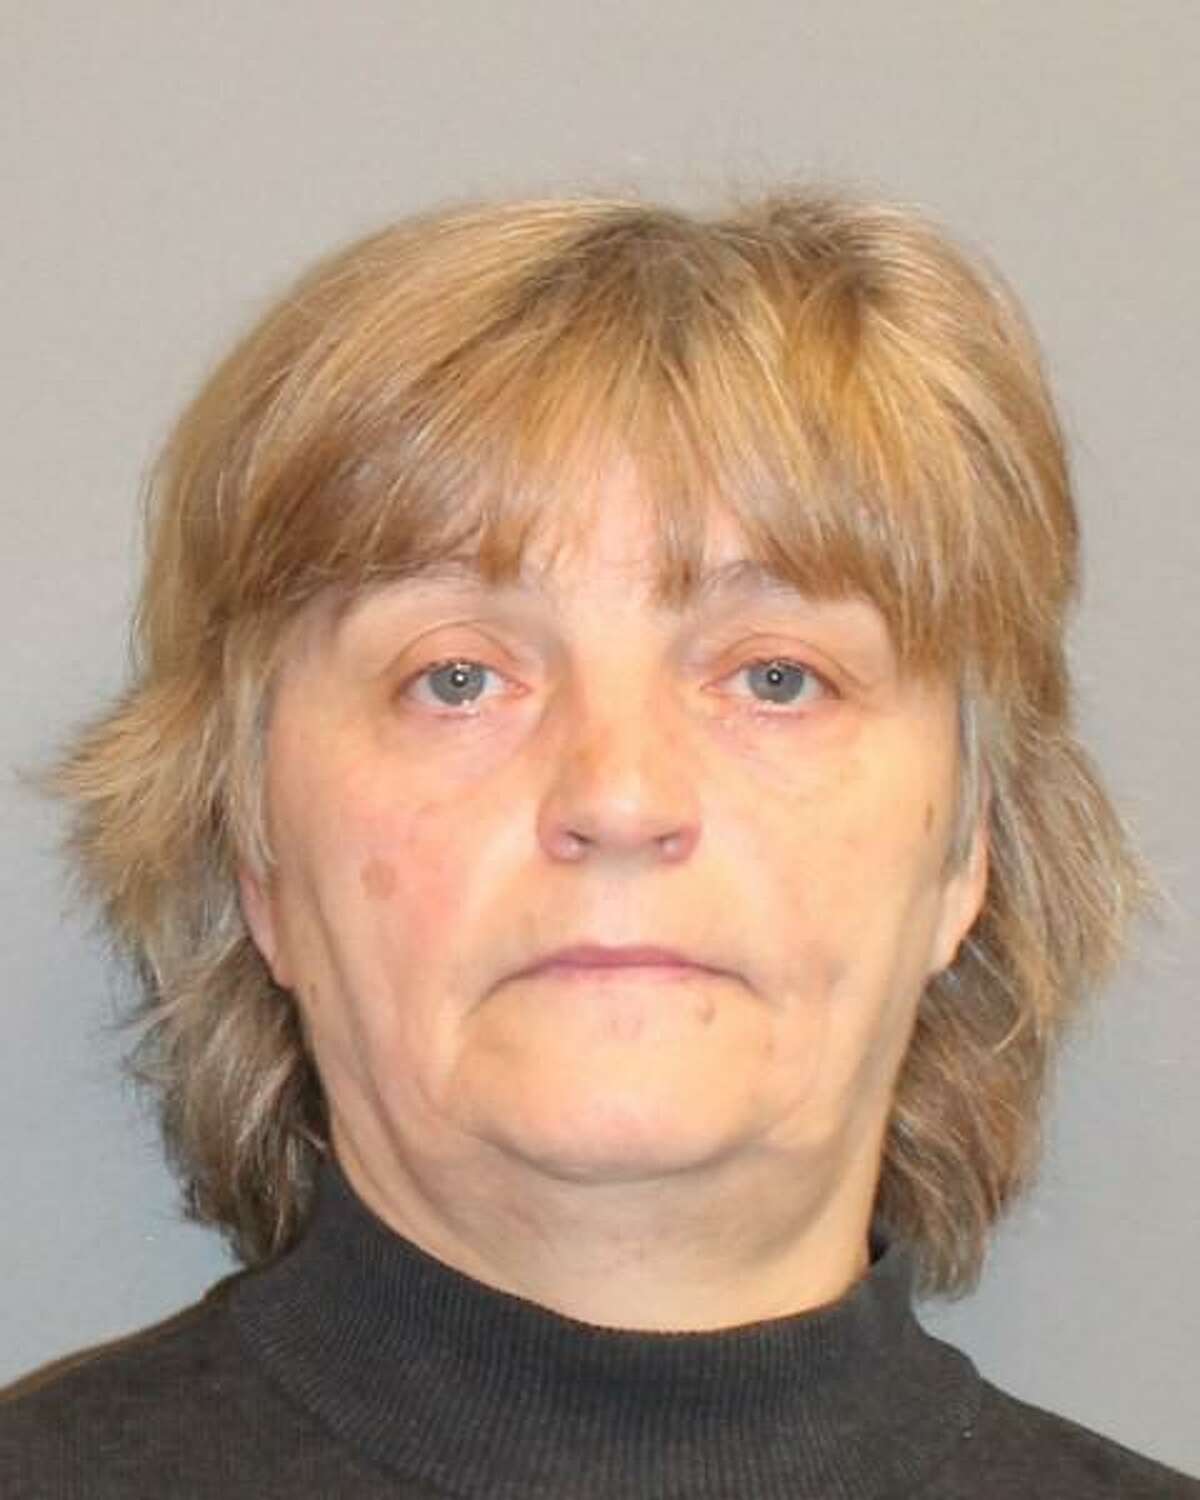 Helen Skulski, 56, of Vista Road in Wilton, was charged with animal cruelty and held on a $25,000 bond.